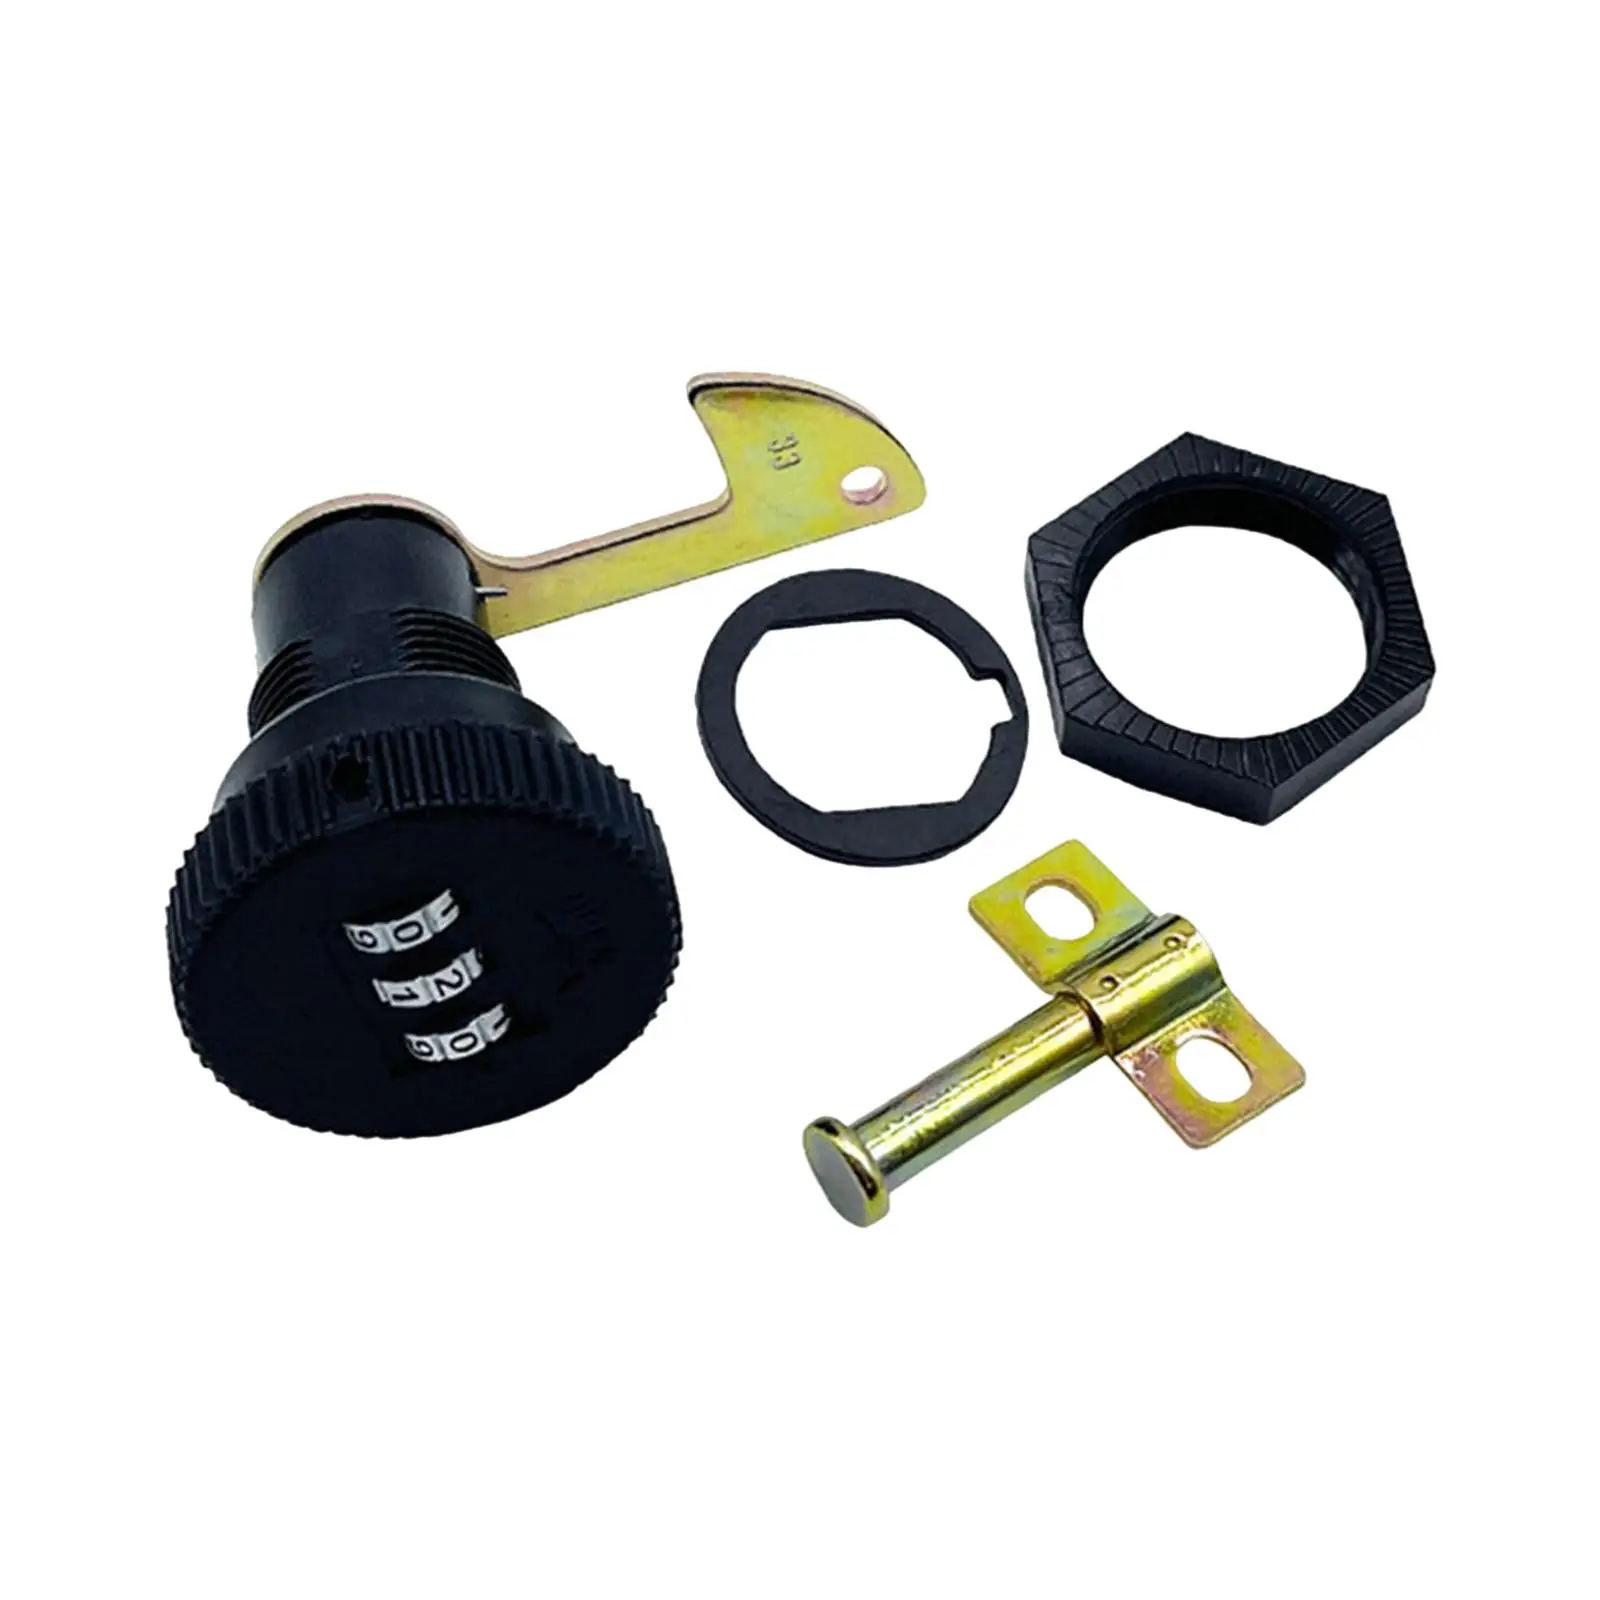 Combination Lock 3 Digital for Motorcycle Trunk Replaces Easily Install